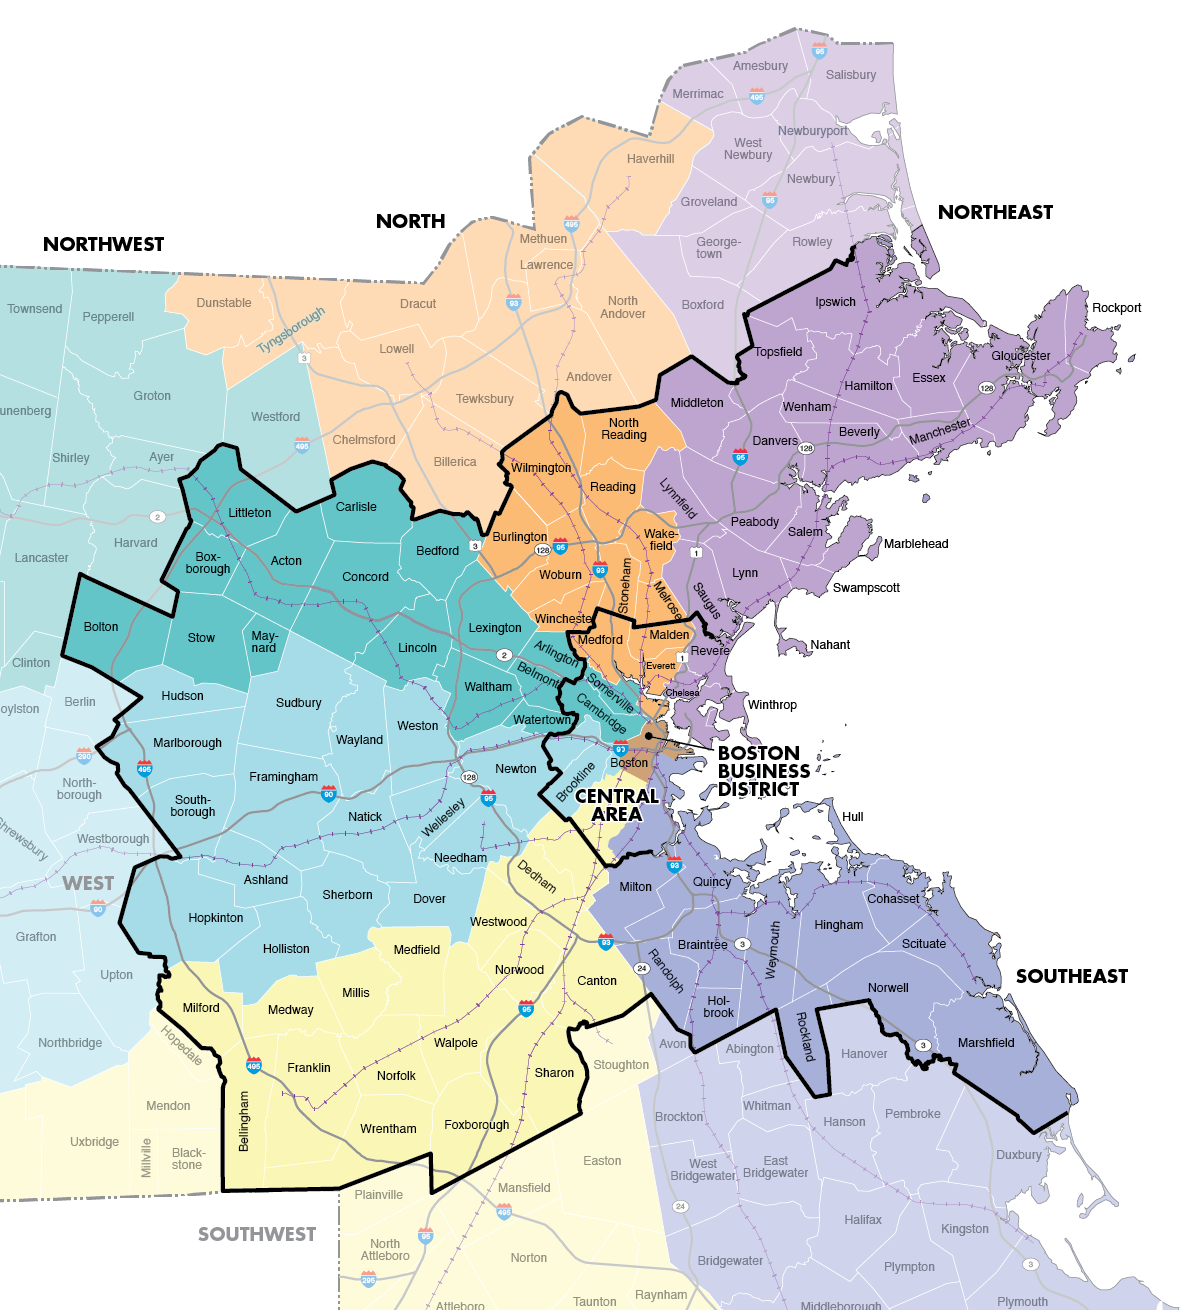 Figure 3-1 is a map of the six radial corridors with the municipalities in the Boston Region MPO Area in darker shading and the adjoining municipalities in the lighter shading of their associated sectors. Figure 3-1 also displays highways and rail lines in the radial corridors as well as the boundary for the Central Area and point for the Boston Business District.